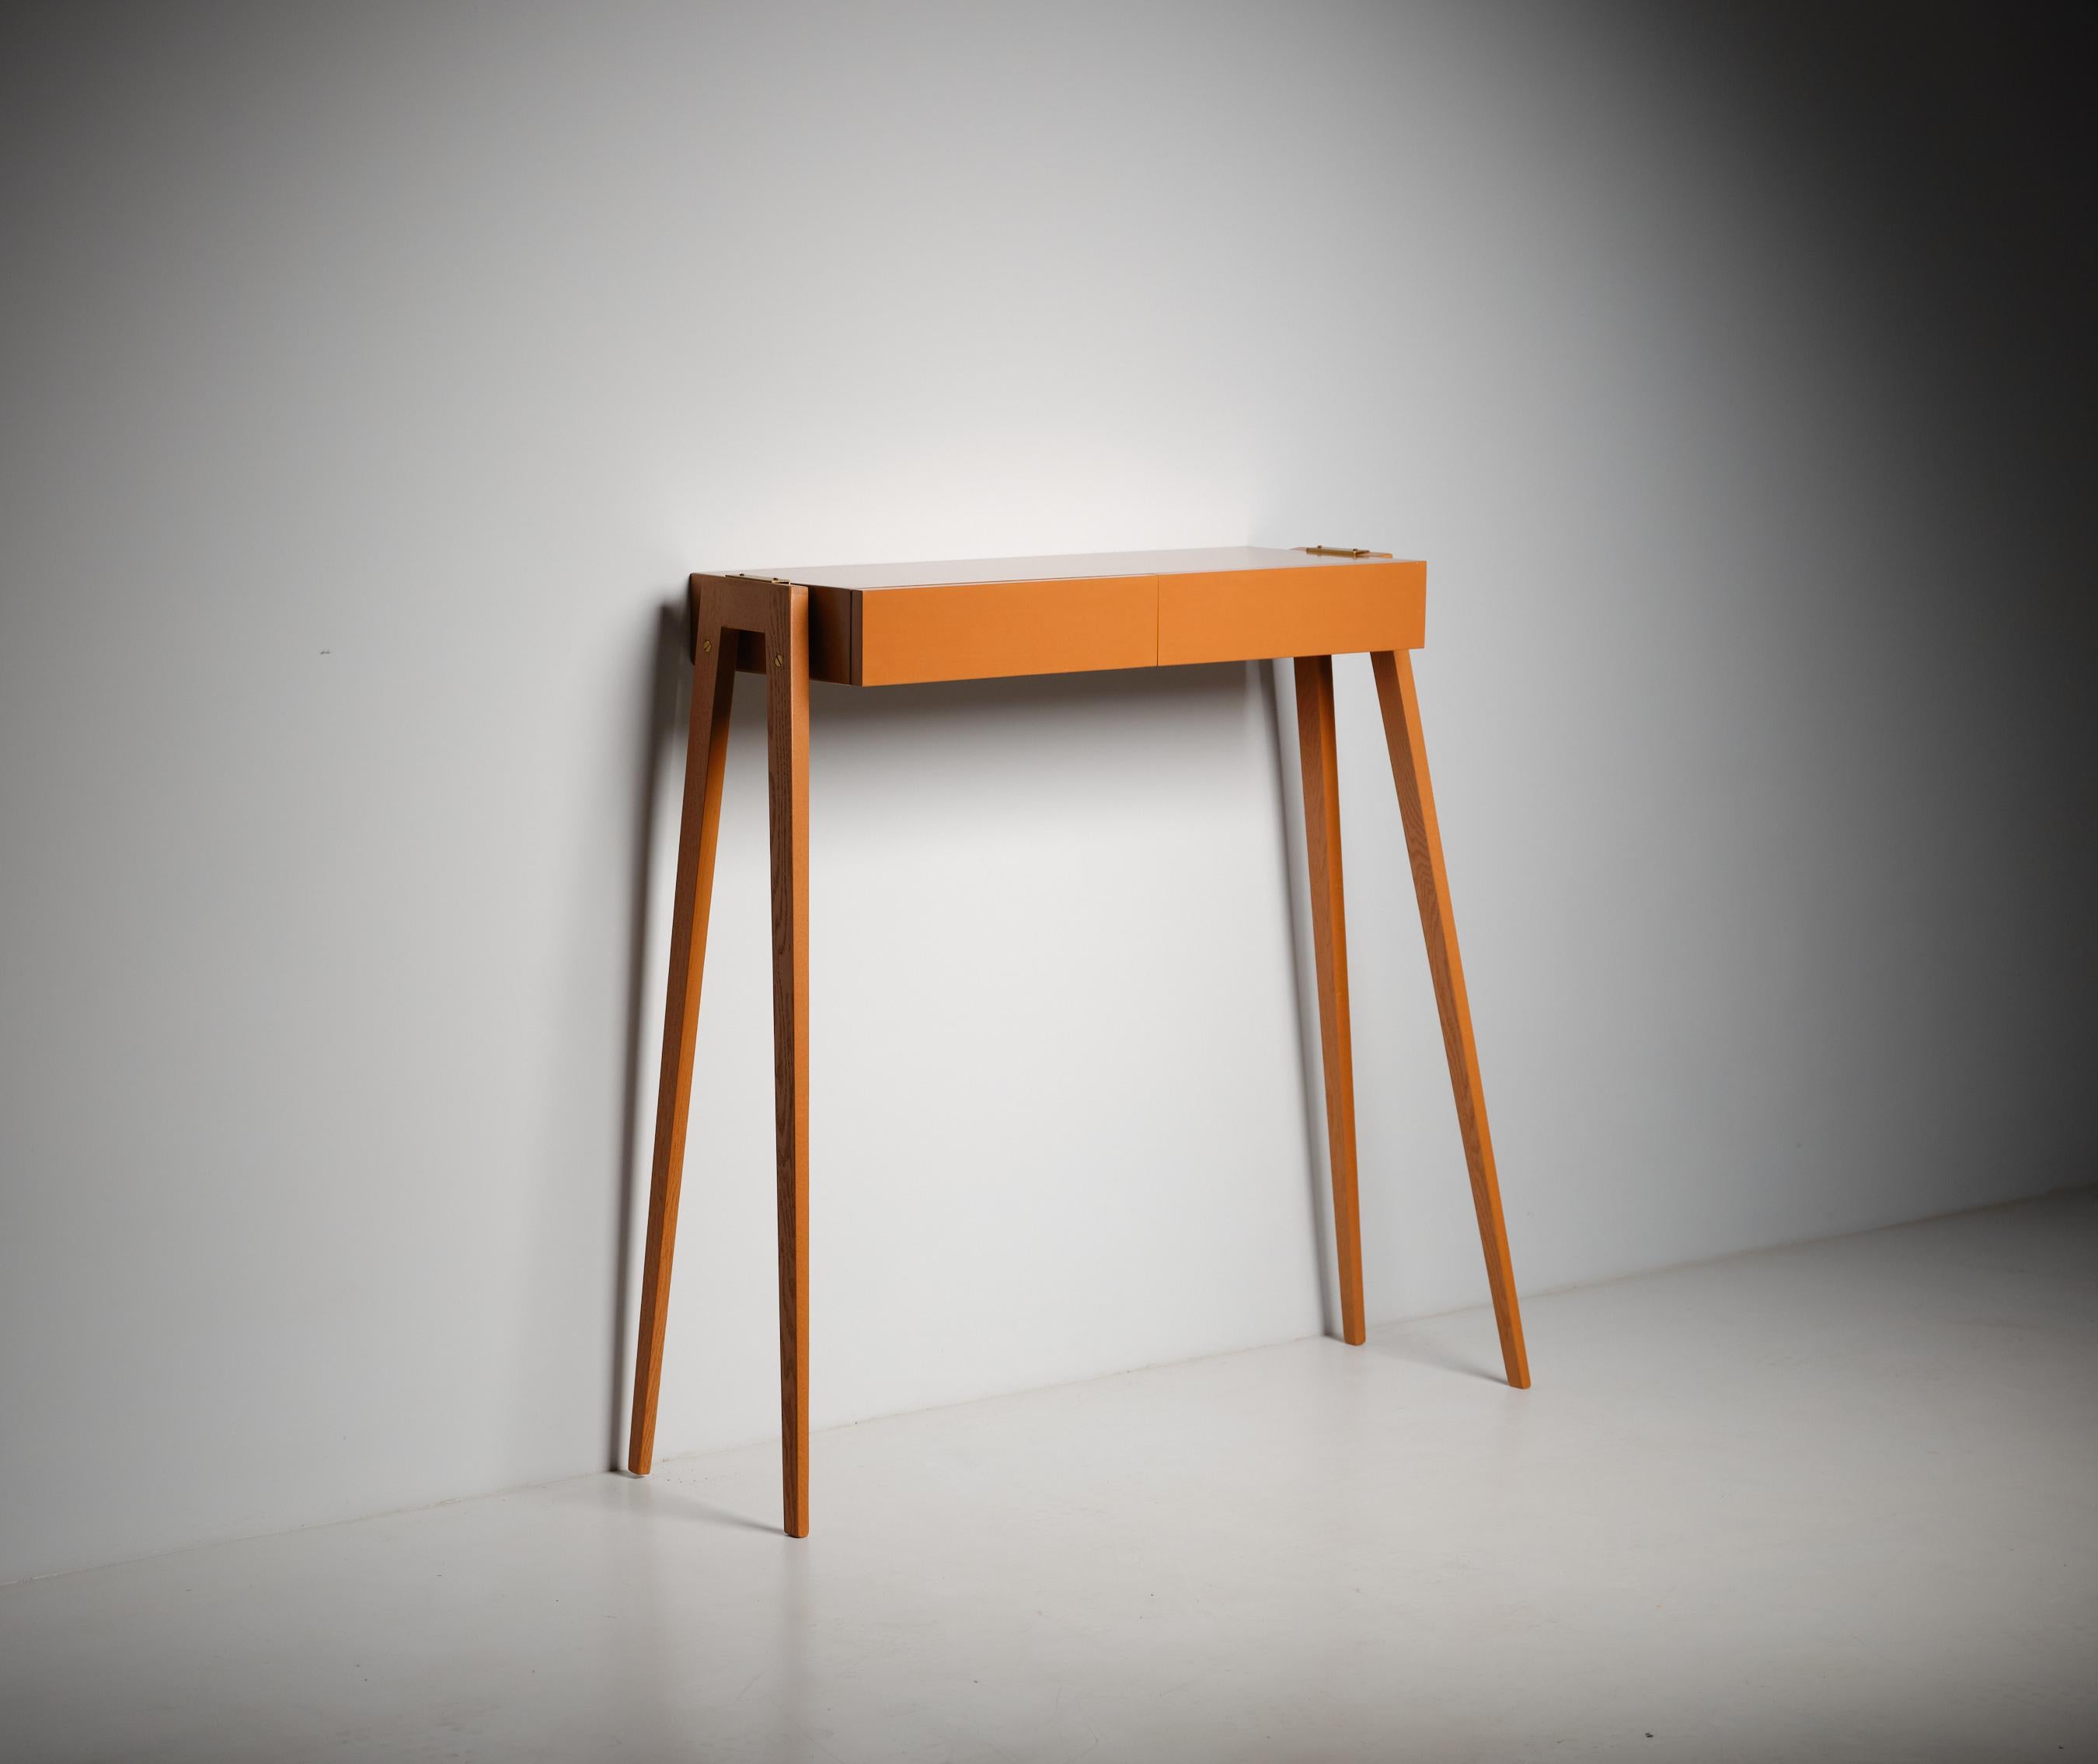 Italian Design Console from the 1950s: Restyled Elegance in Modern Rust Orange 1